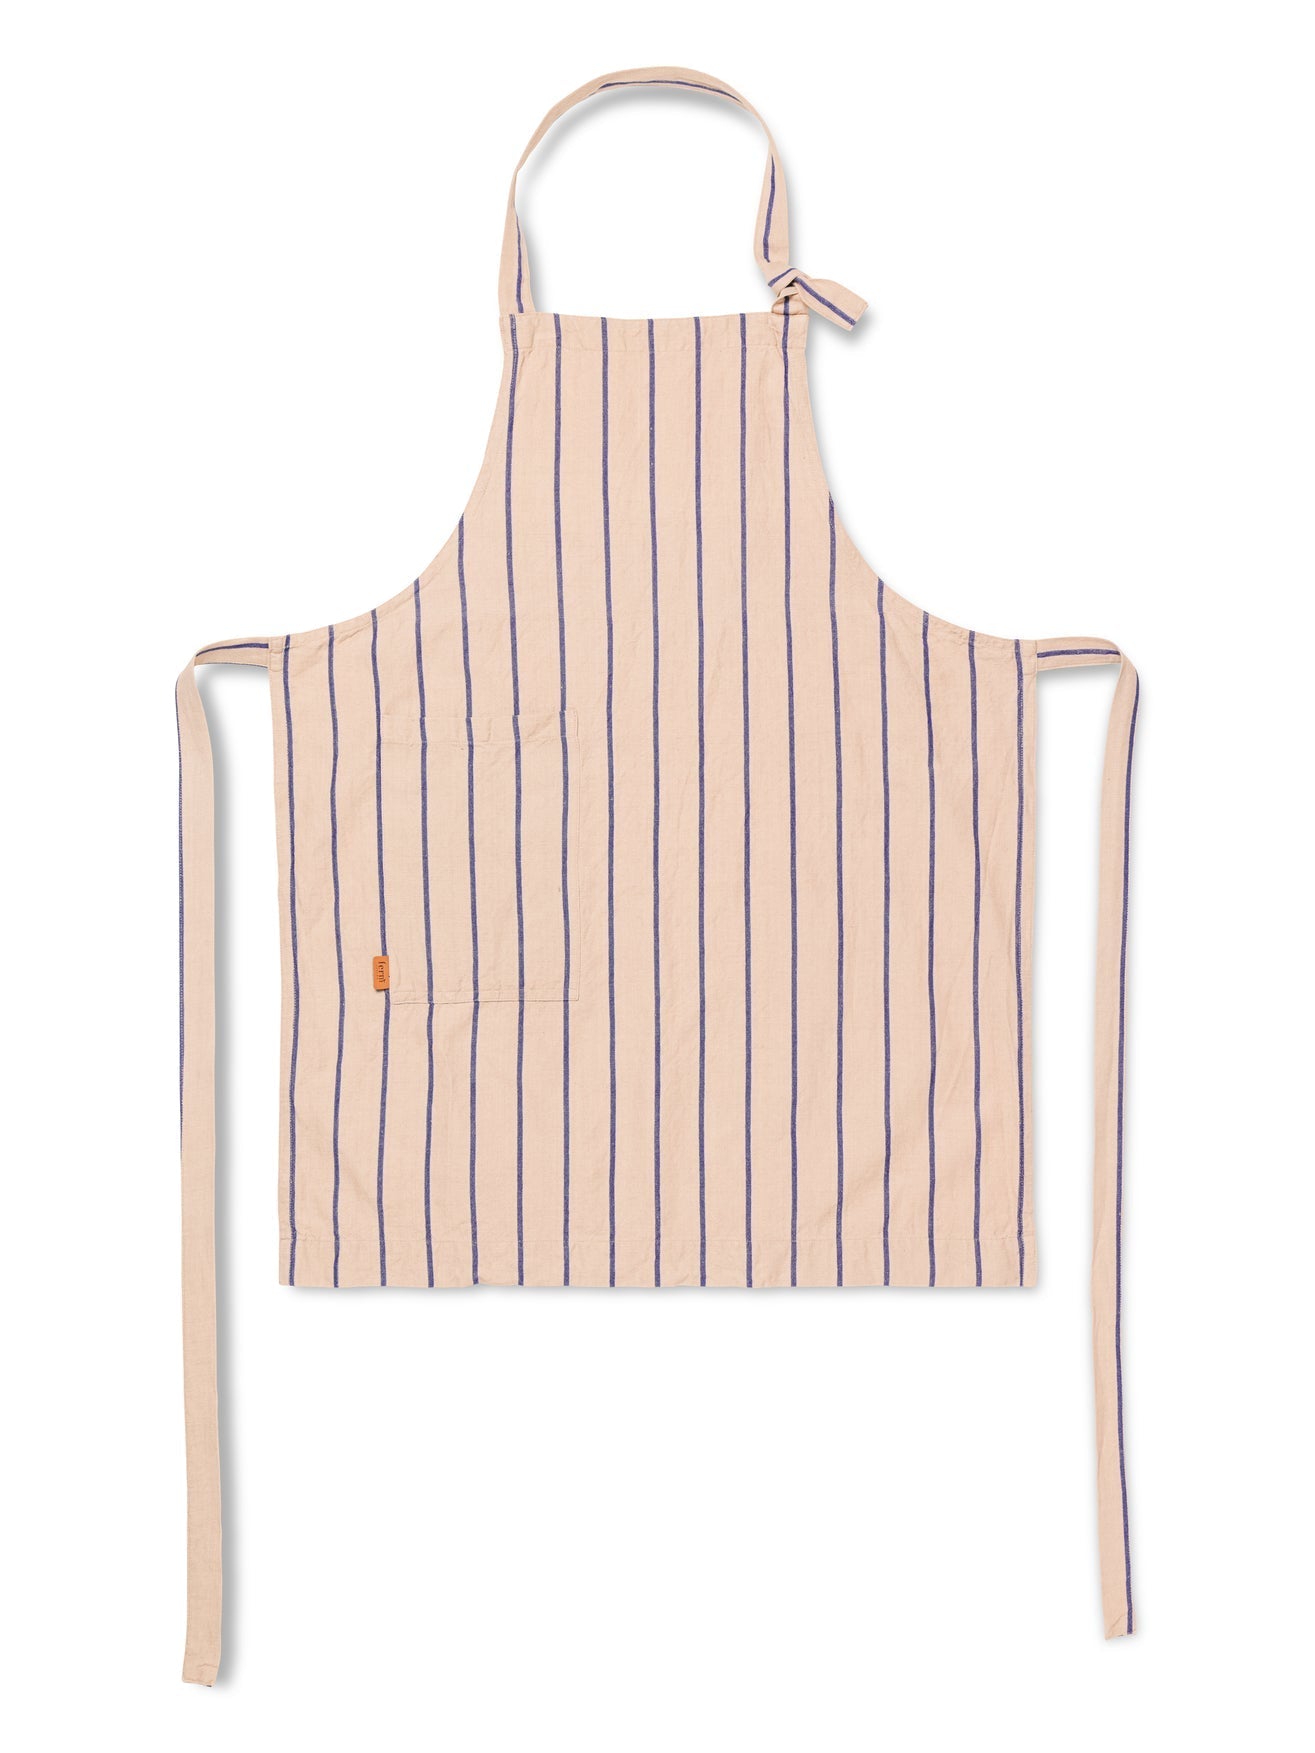 Shop Hale Yarn-Dyed Apron in Various Colors | Burke Decor